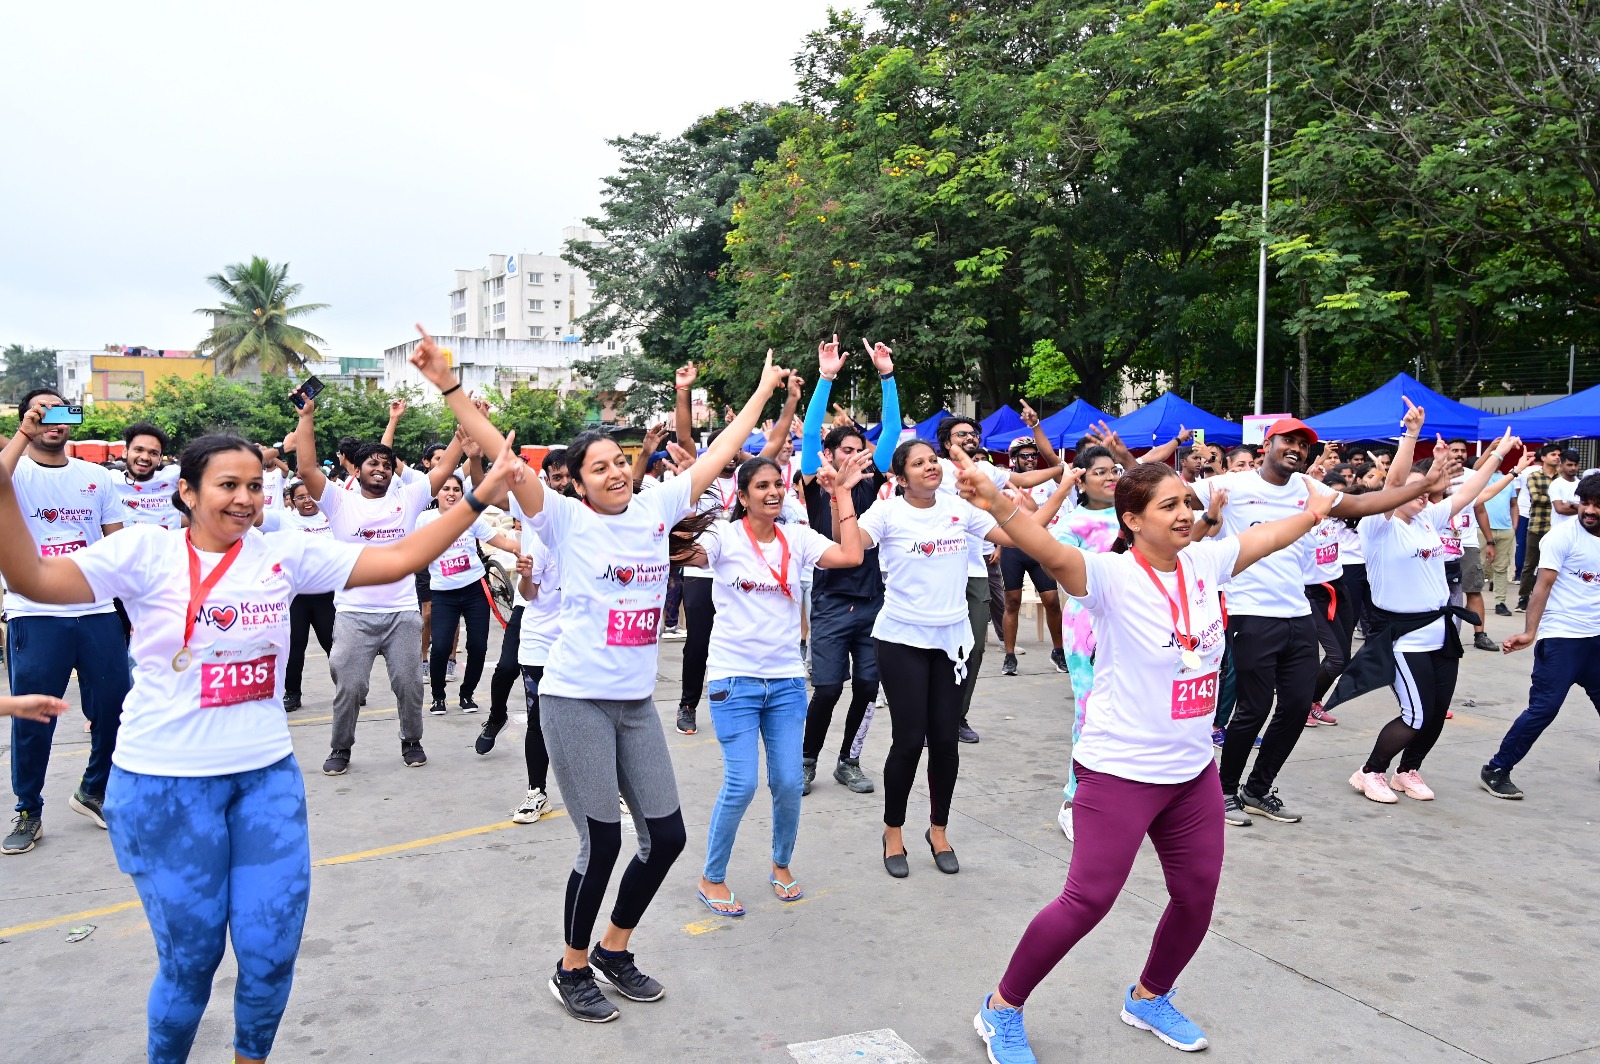 Kauvery Hospital’s 2nd Edition of Kauvery B.E.A.T Event Ignites World Heart Day with over 2,500 Participants in 5K Marathon